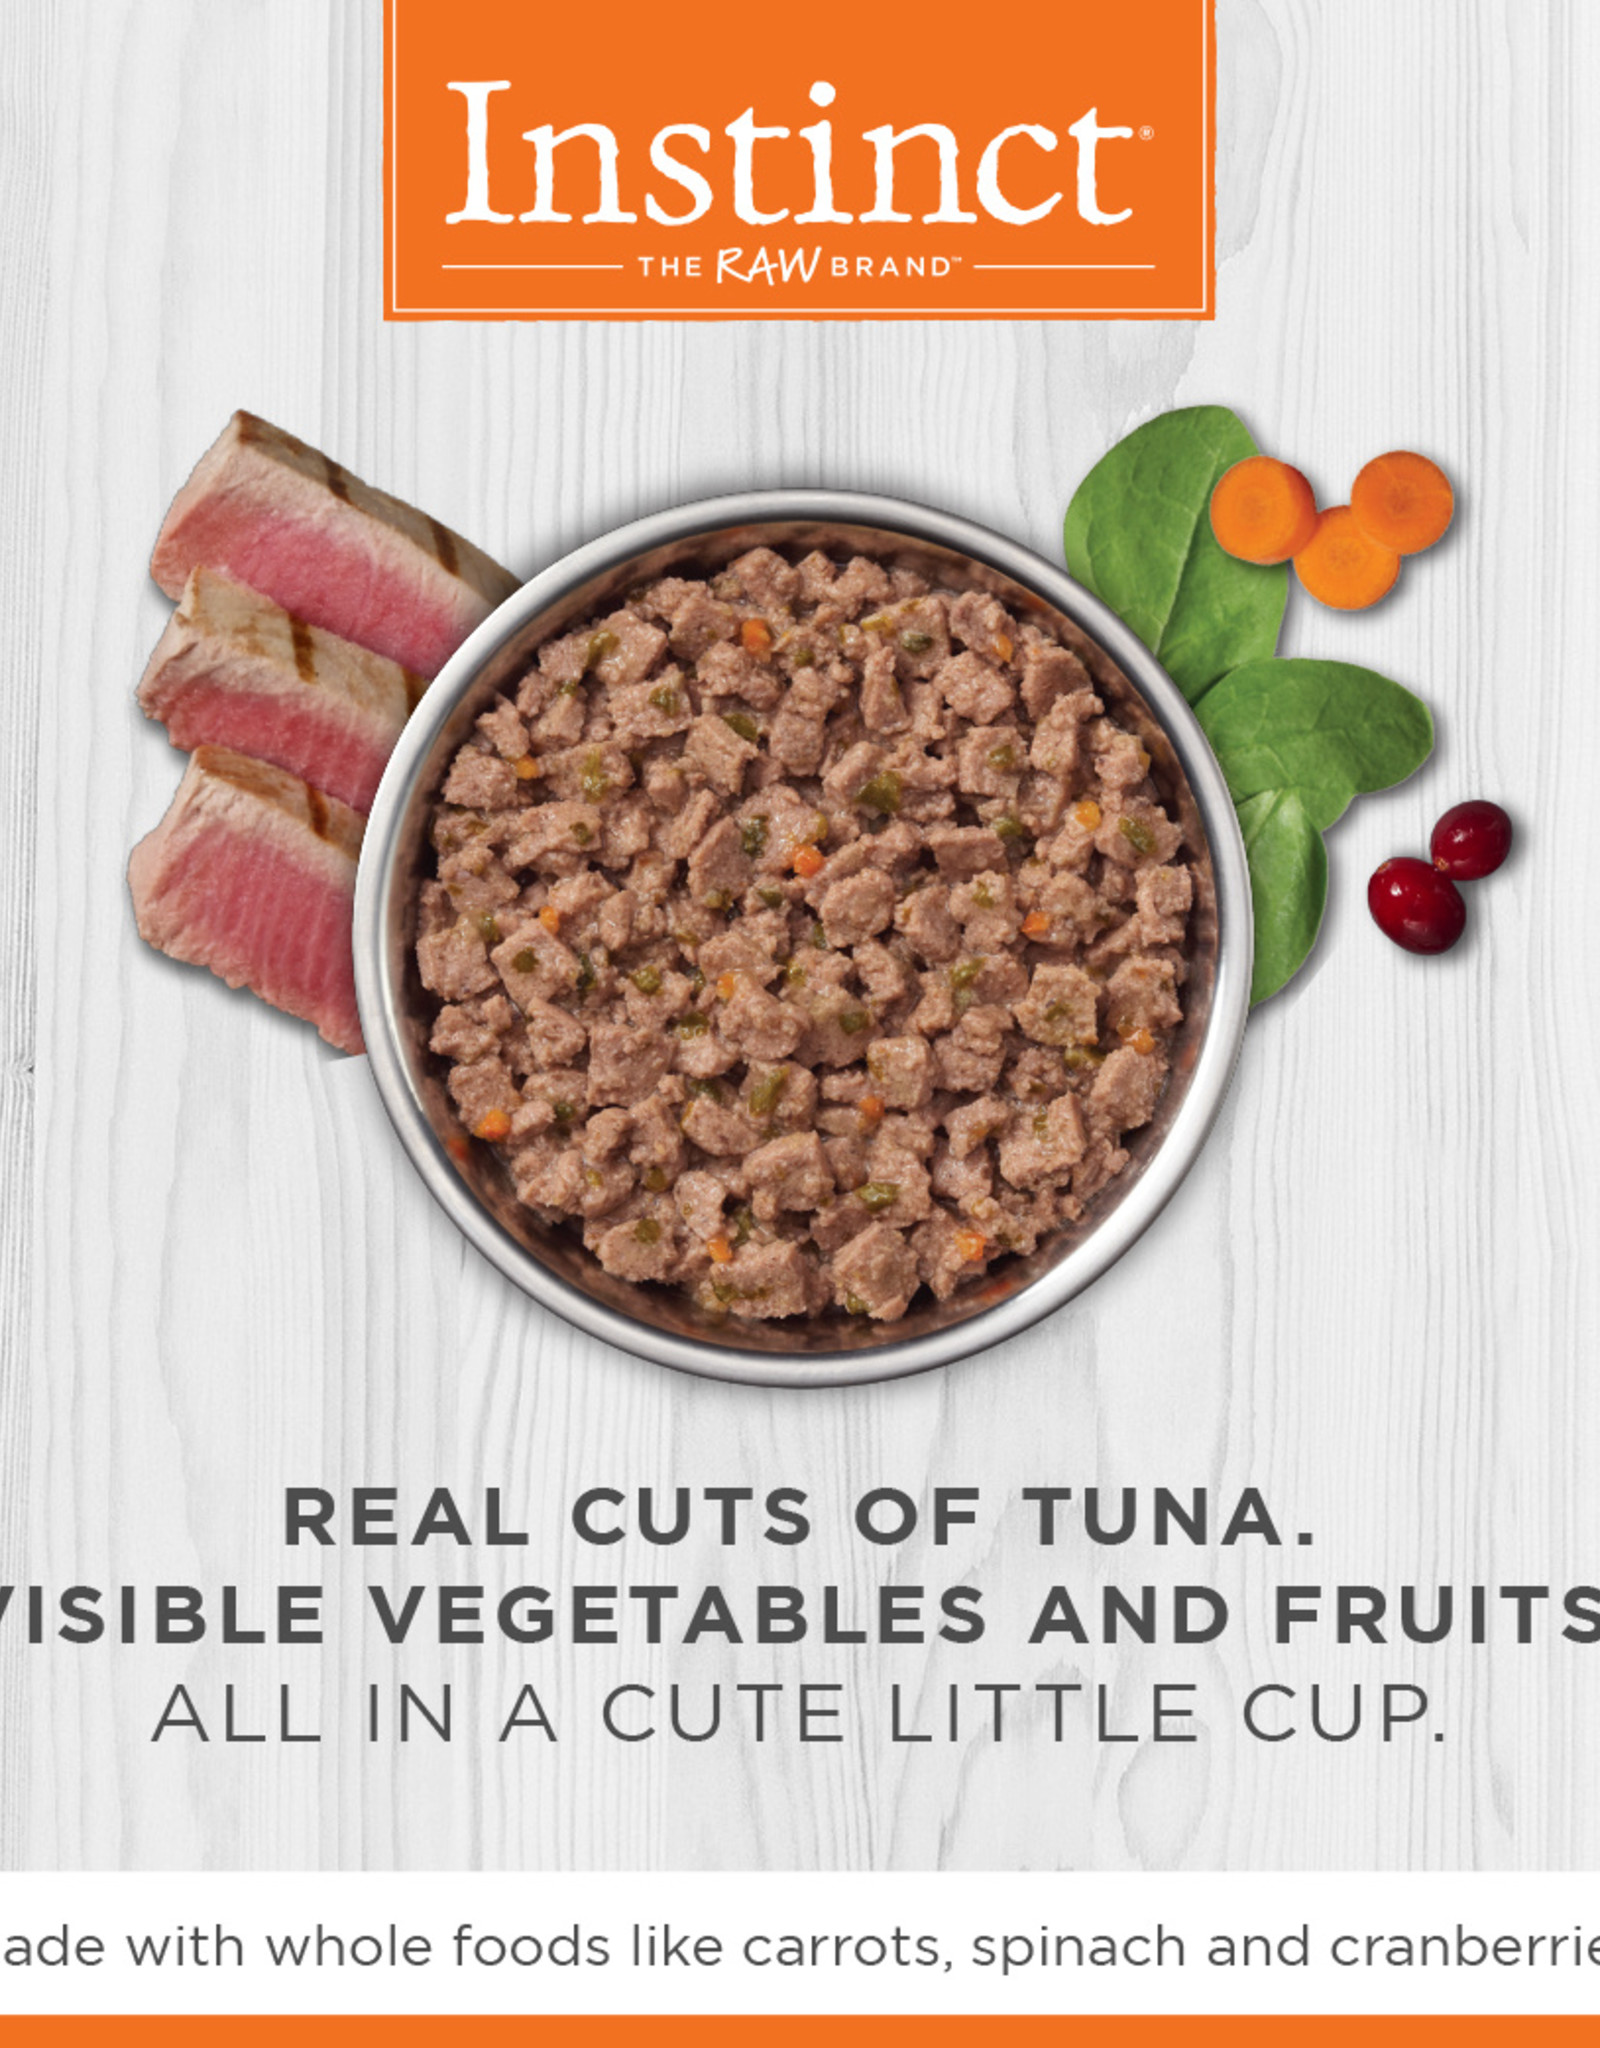 NATURE'S VARIETY NATURES VARIETY INSTINCT MINCED TUNA CAT 3.5OZ CASE OF 12